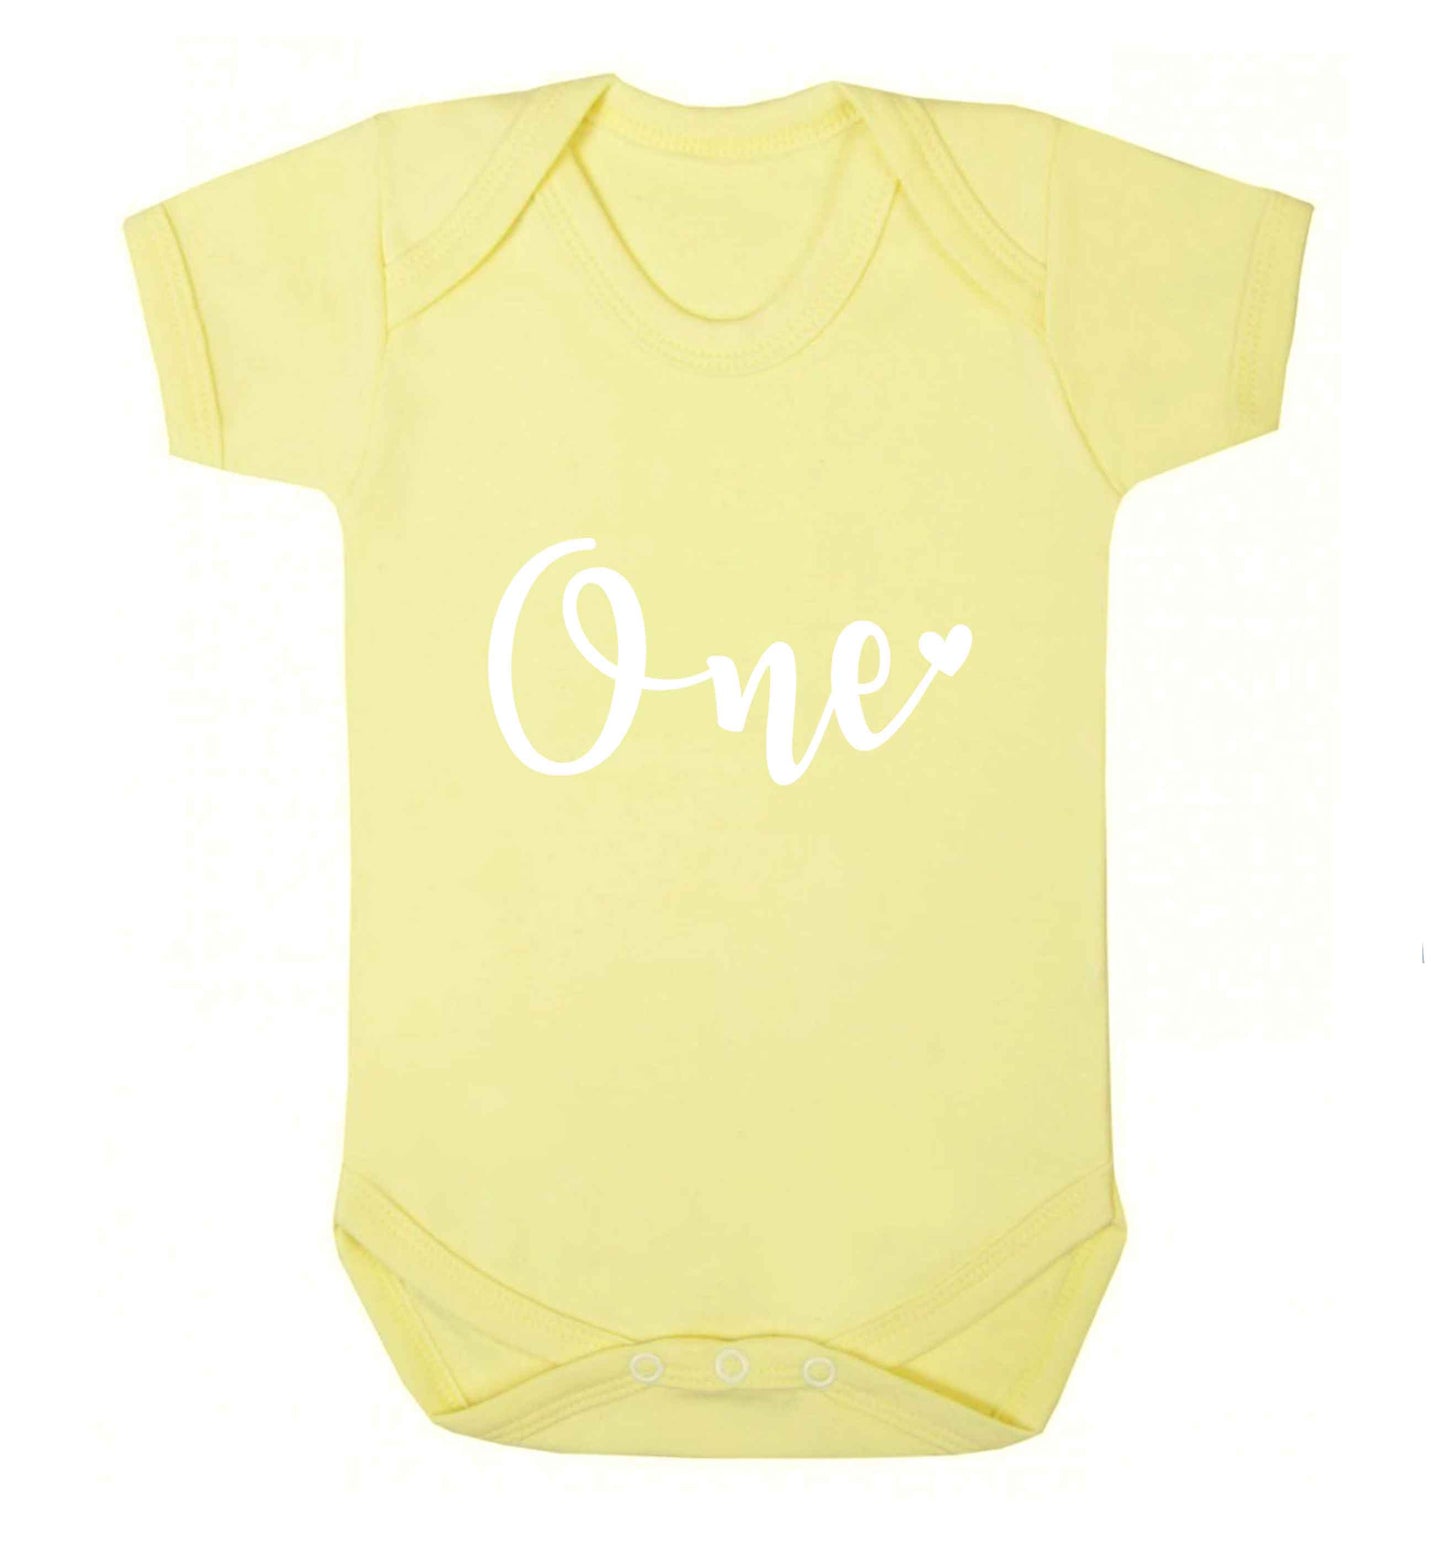 One baby vest pale yellow 18-24 months